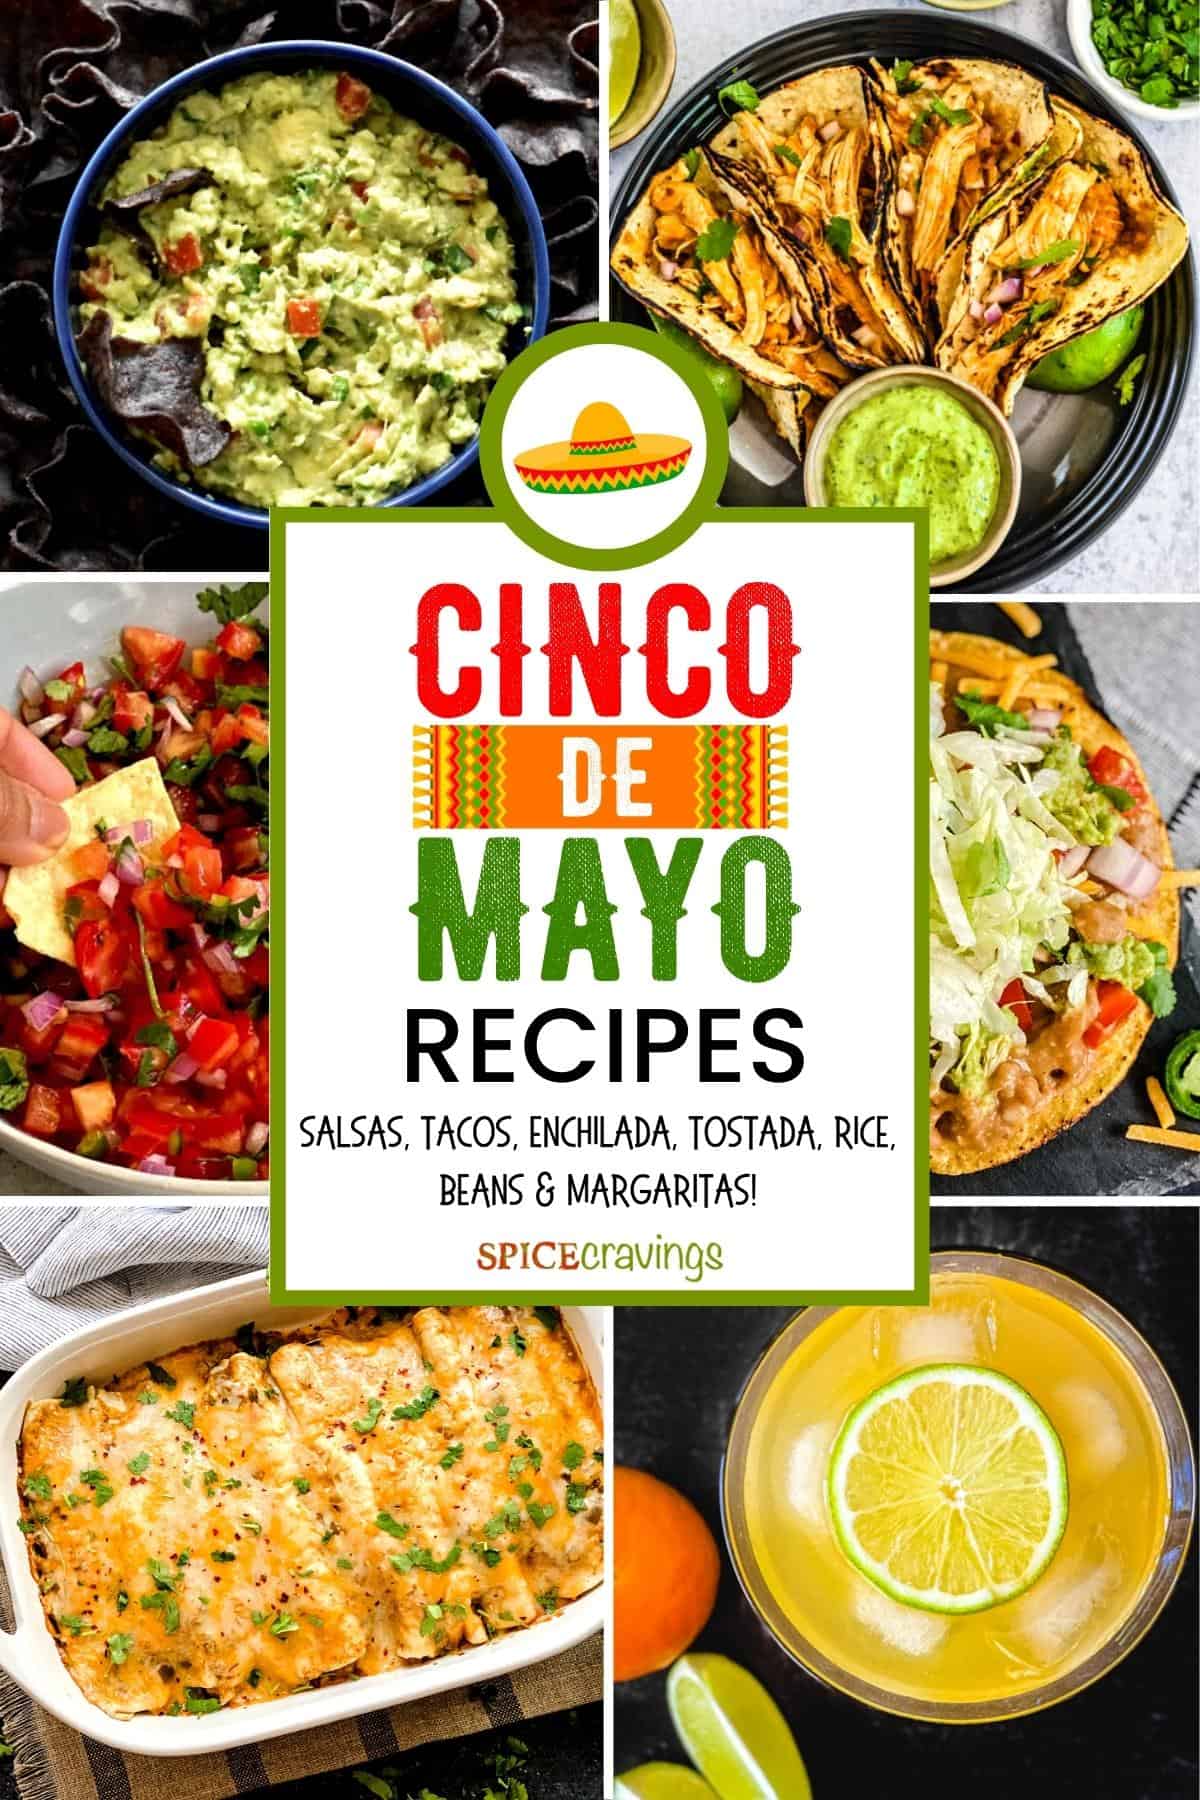 6-image collage of mexican flavored recipes with caption "30+ Cinco De Mayo Recipes"